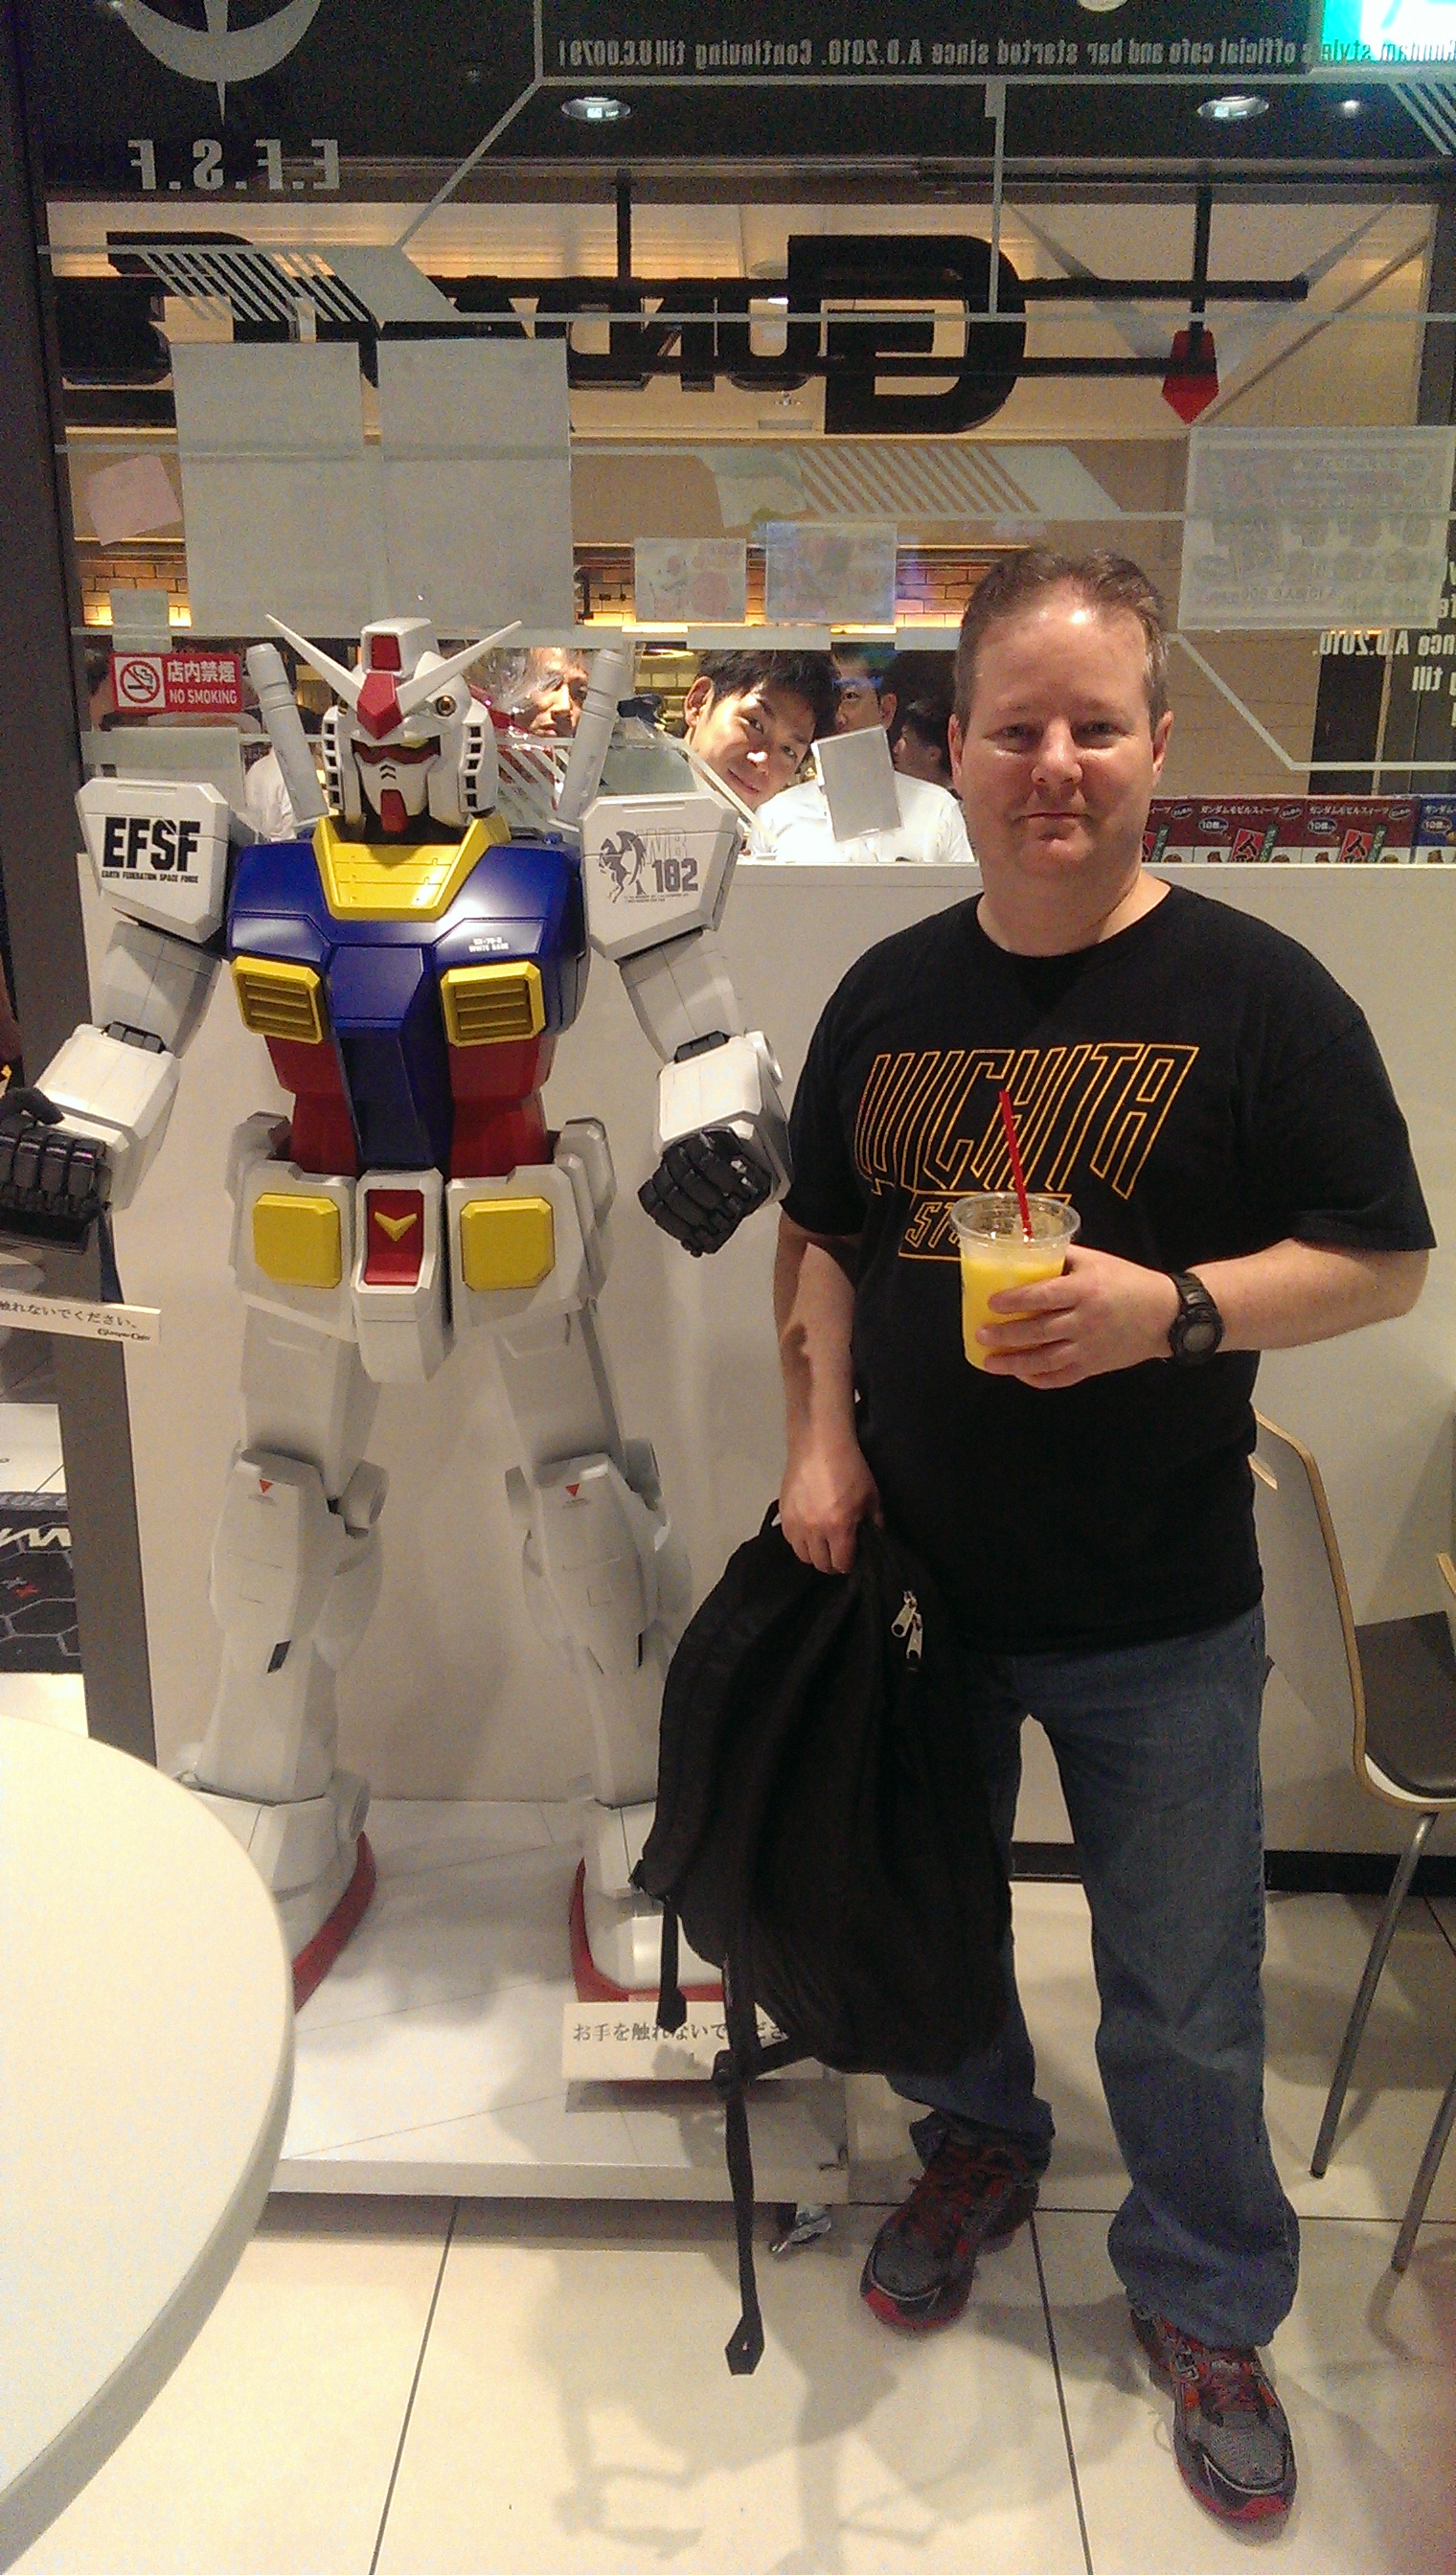 And the Gundam on display in the cafe.